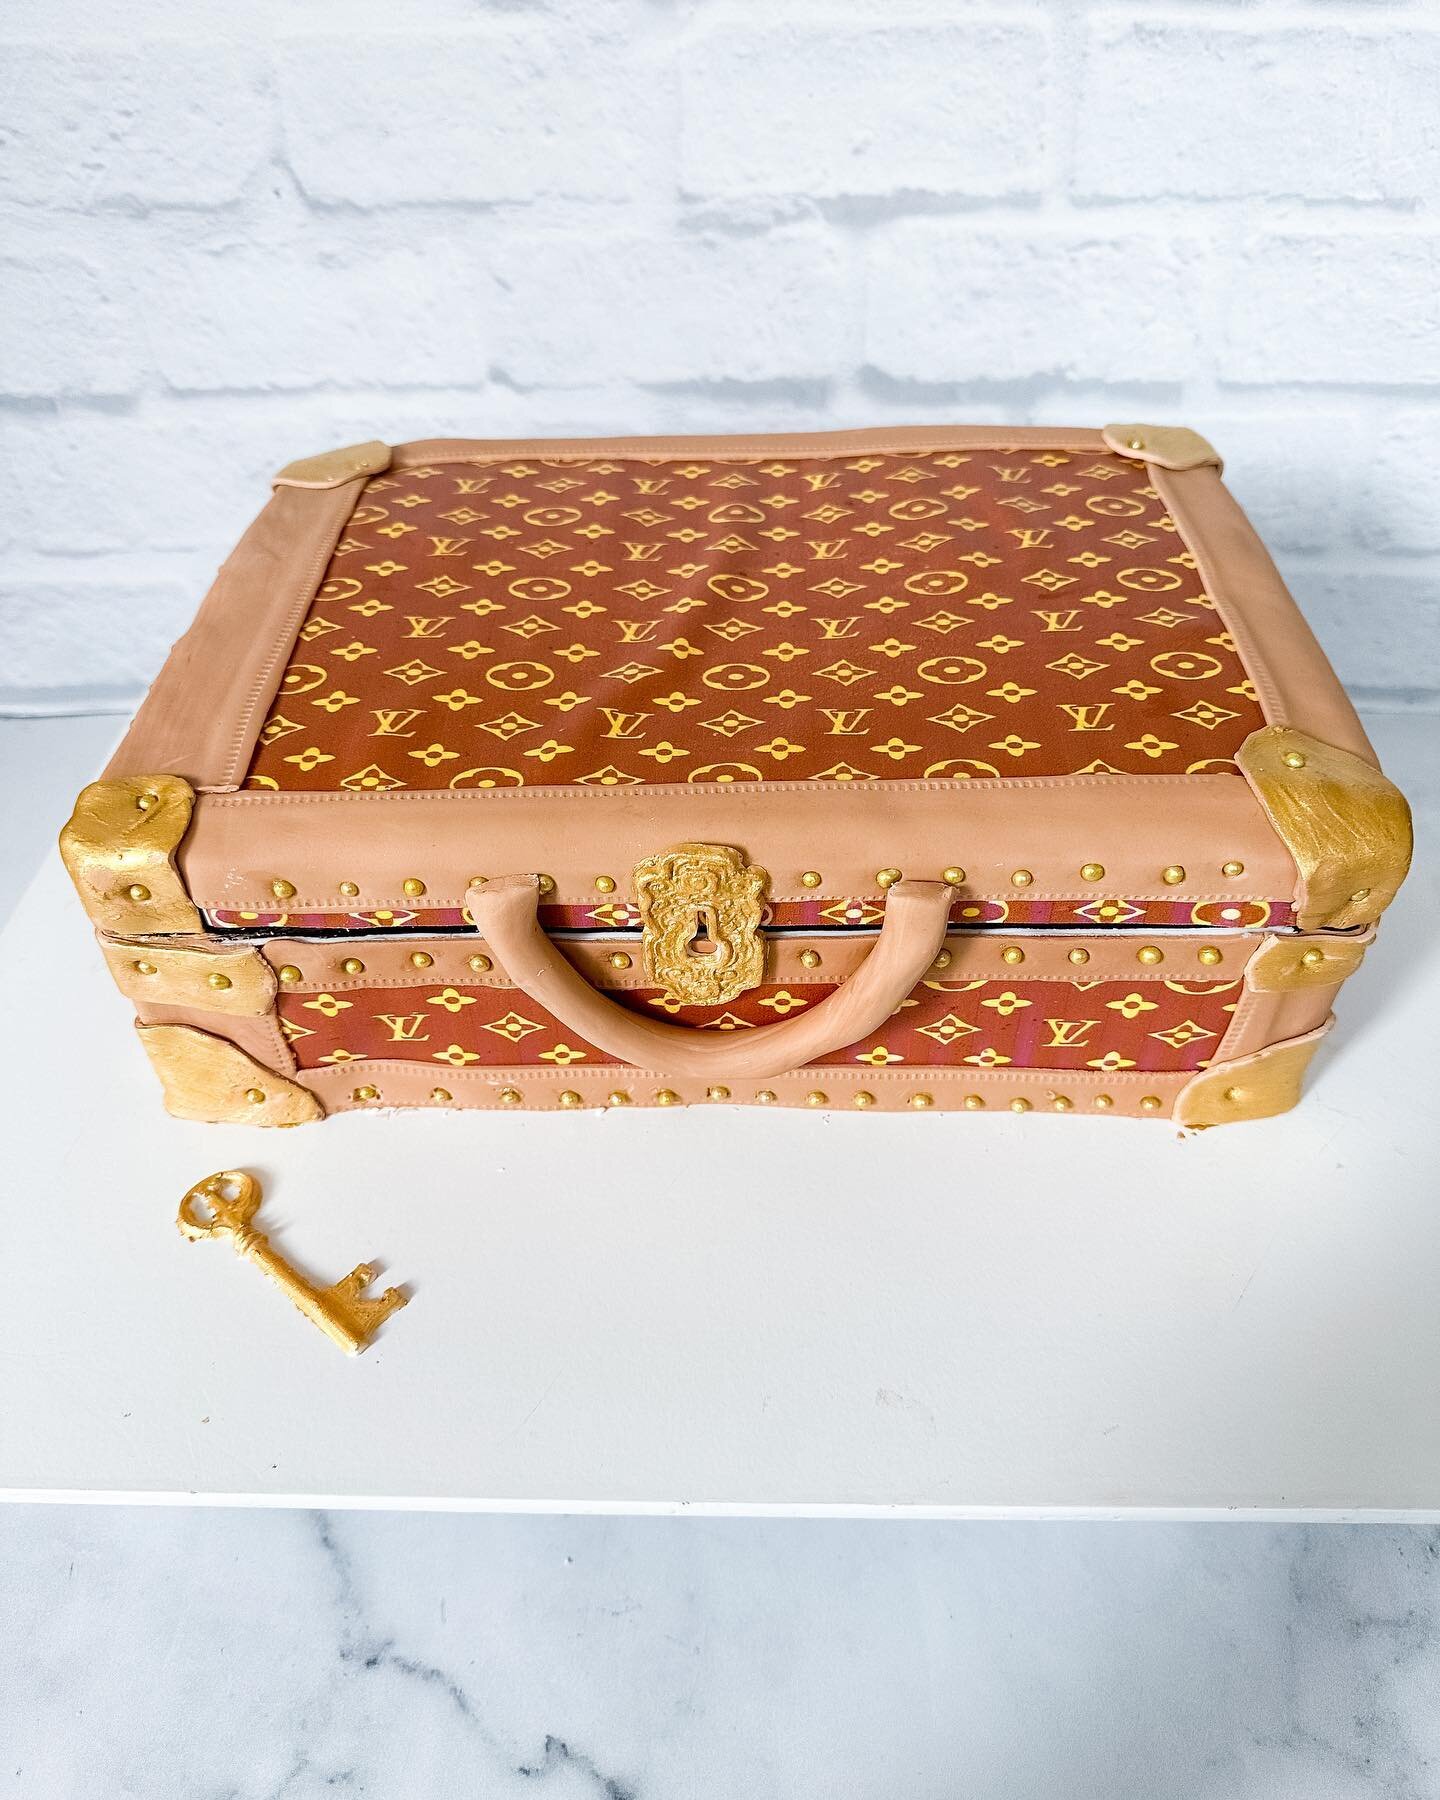 It&rsquo;s called Fashion darling❤️ and a weekend of celebrations! Here&rsquo;s part one of Kris&rsquo;s 40th Birthday extravaganza.. feat Kris&rsquo;s own edible LV suitcase with a white choc mud inside filled with delish strawberry buttercream.. fu